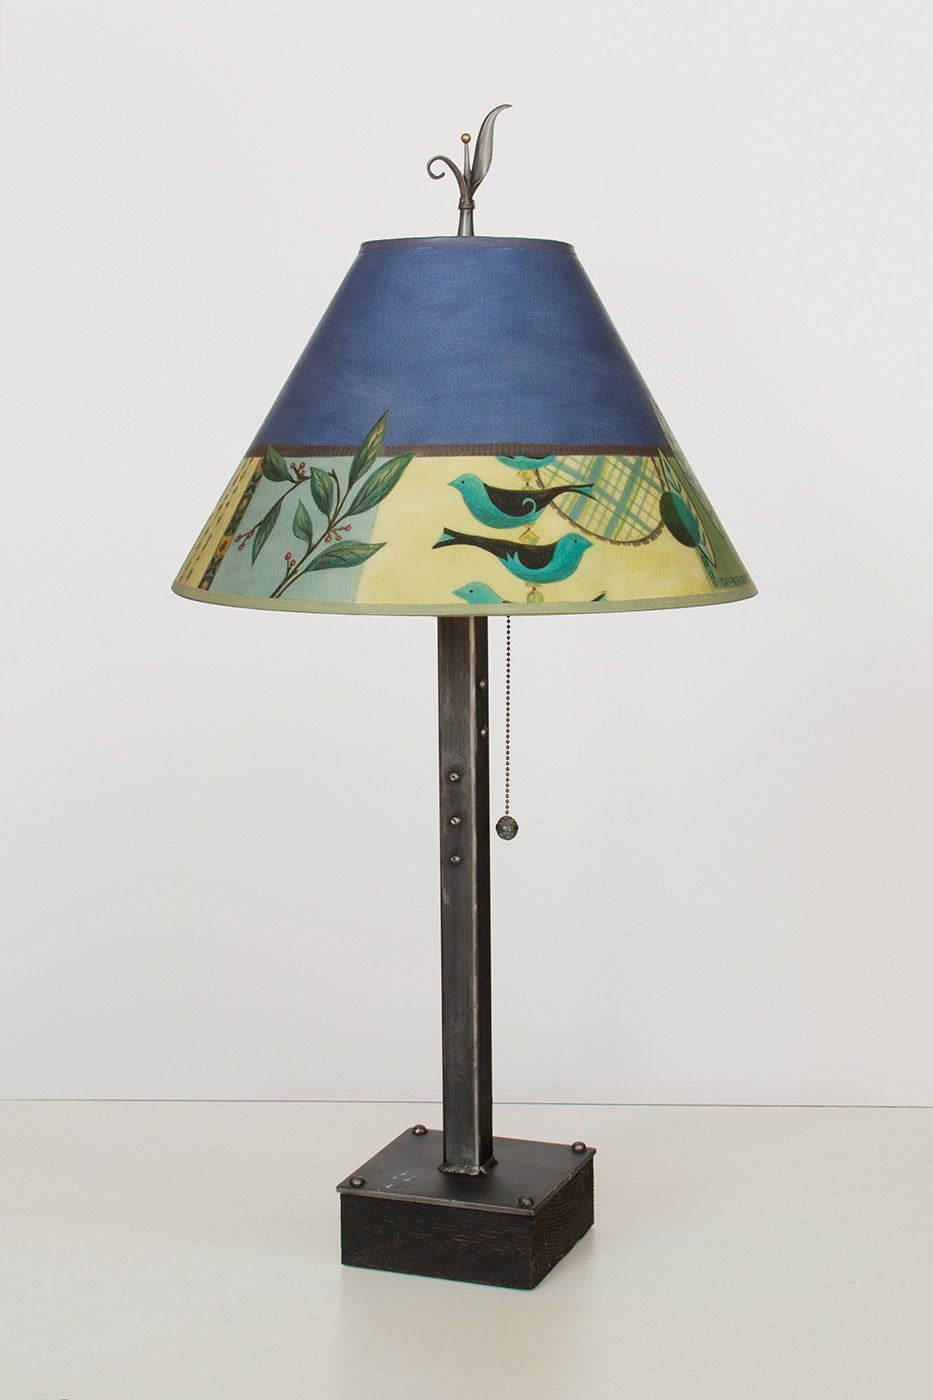 Steel Table Lamp on Wood with Medium Conical Shade in New Capri Periwinkle - Lit